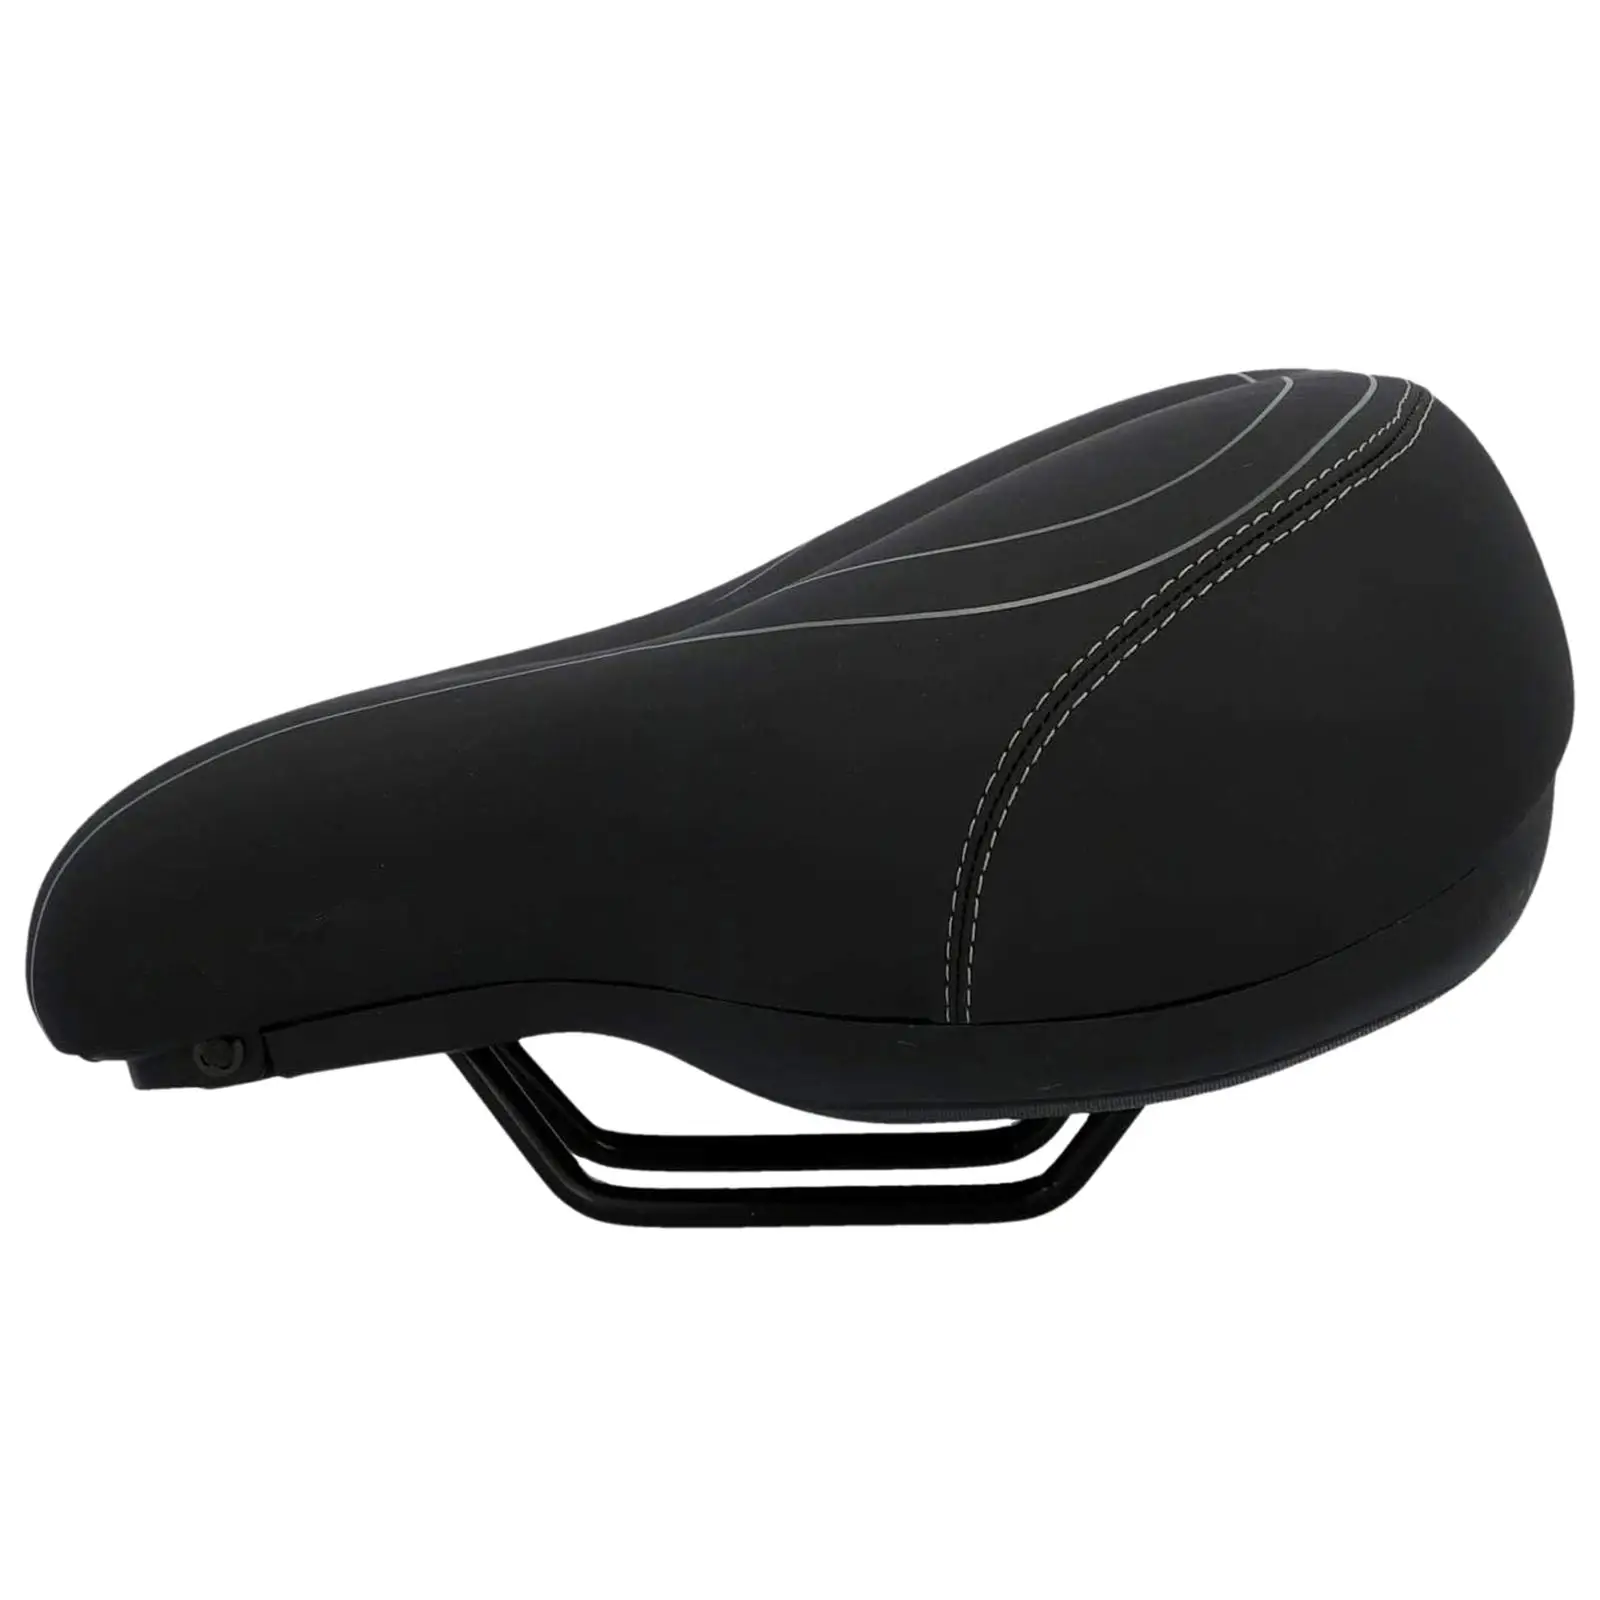 Comfort Bicycle Seat W/ Storage Space Shockproof Waterproof Breathable Biking Seat Cushion Pad for MTB Cycling Accessories